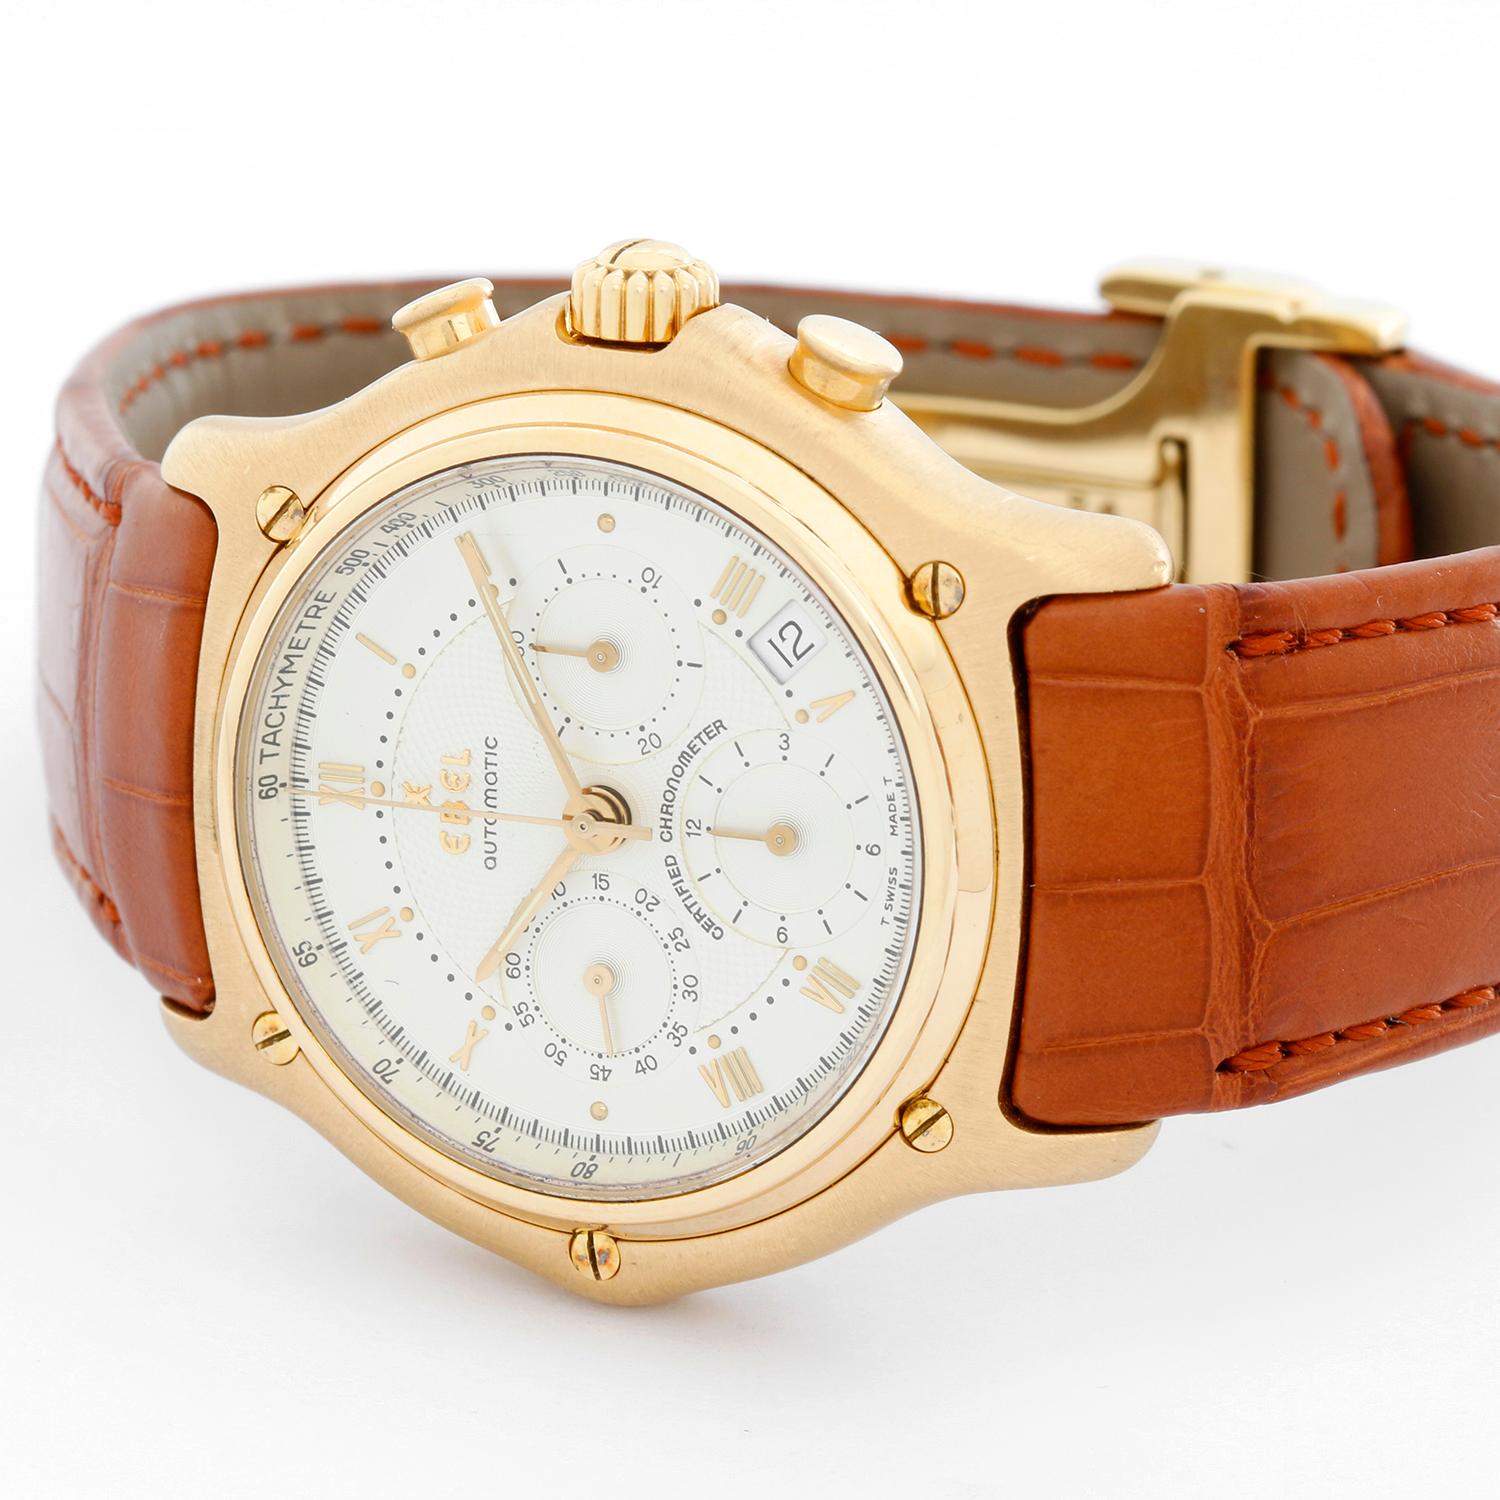 Ebel 1911 Chronograph Men's Watch - Automatic. 18k yellow gold case with 18K yellow gold bezel. White dial with gold Roman numerals. Leather strap with 18k yellow gold deployant clasp. Pre-owned with custom box.